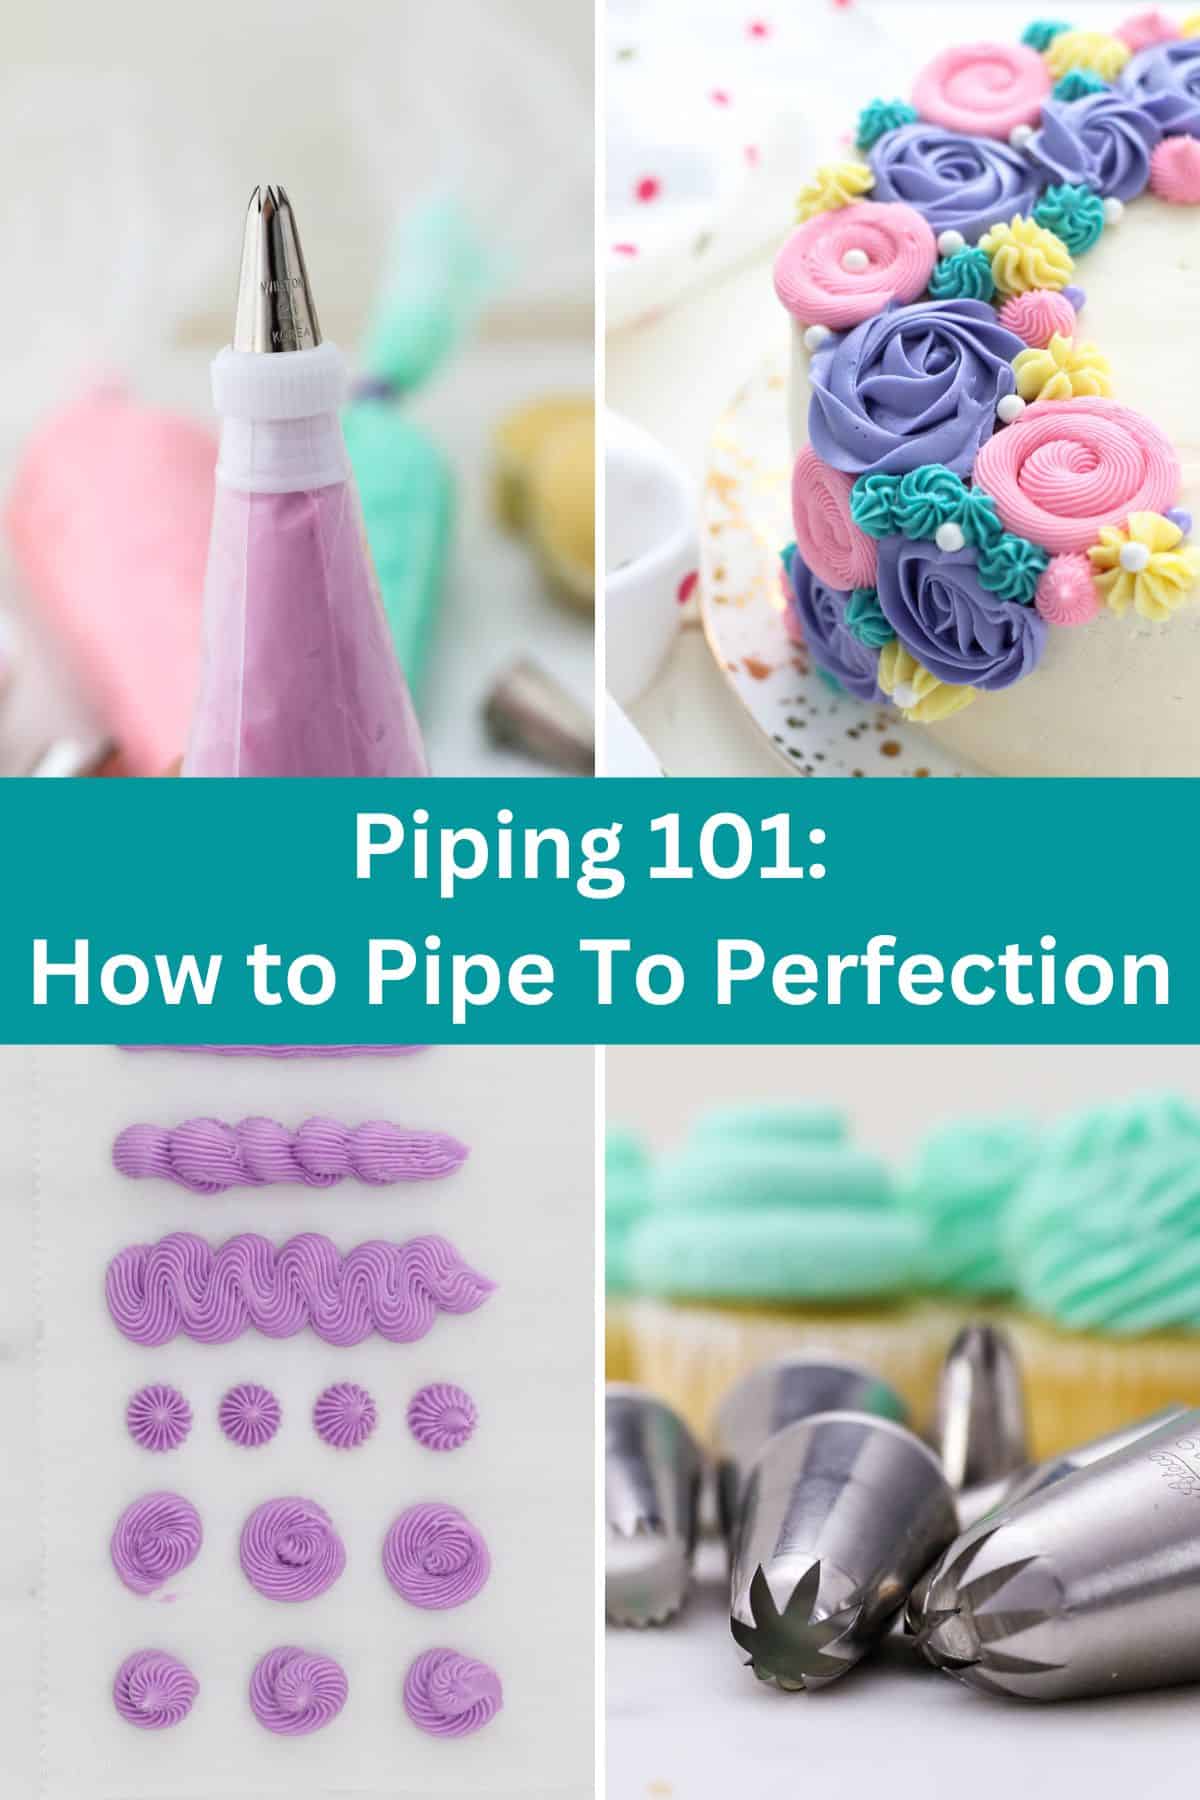 Collage image of various piping tips, decorated cake, and piping bags filled with buttercream. Text overlay says "Piping 101: How to Pipe to Perfection"